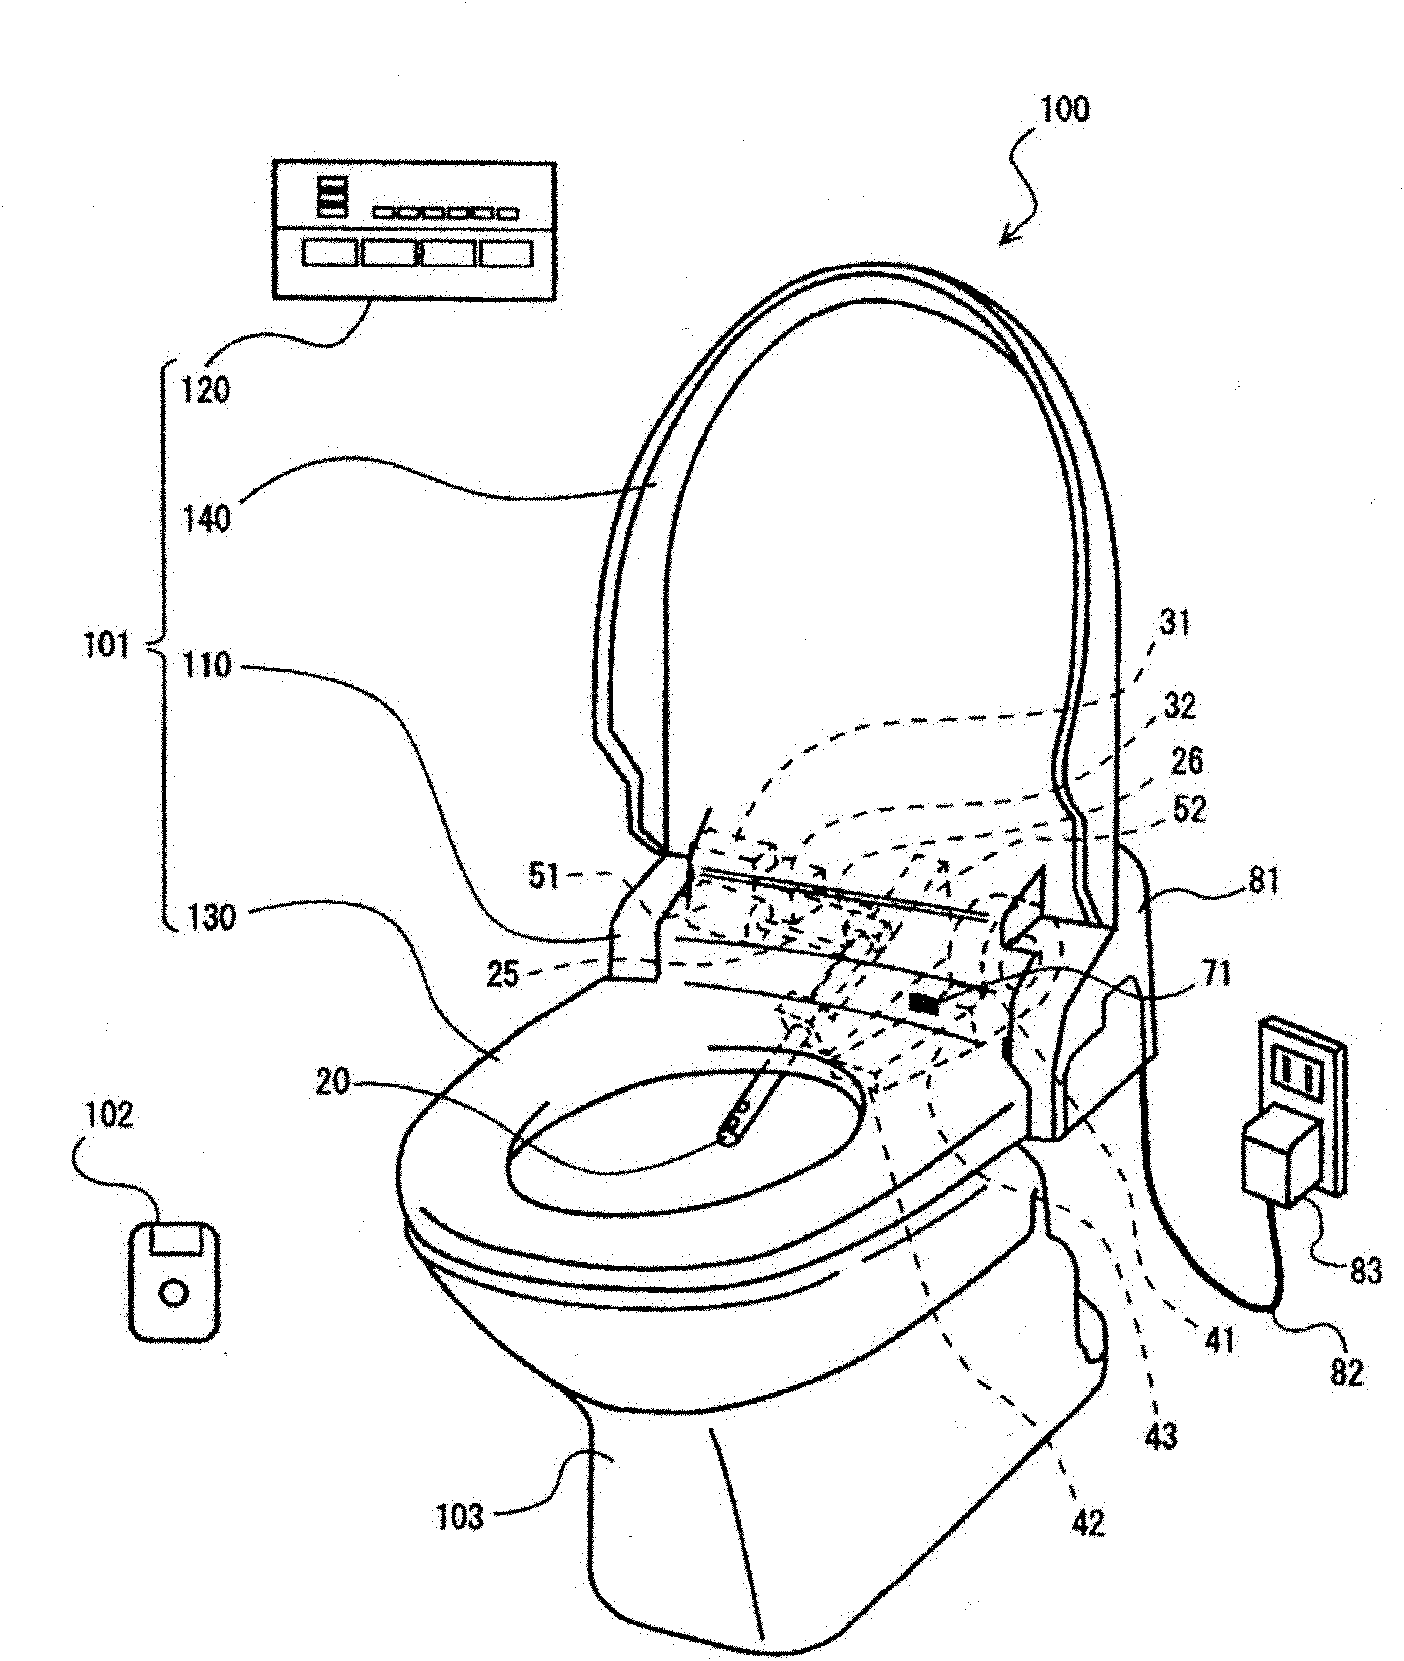 Sanitary washing device provided with drying mechanism